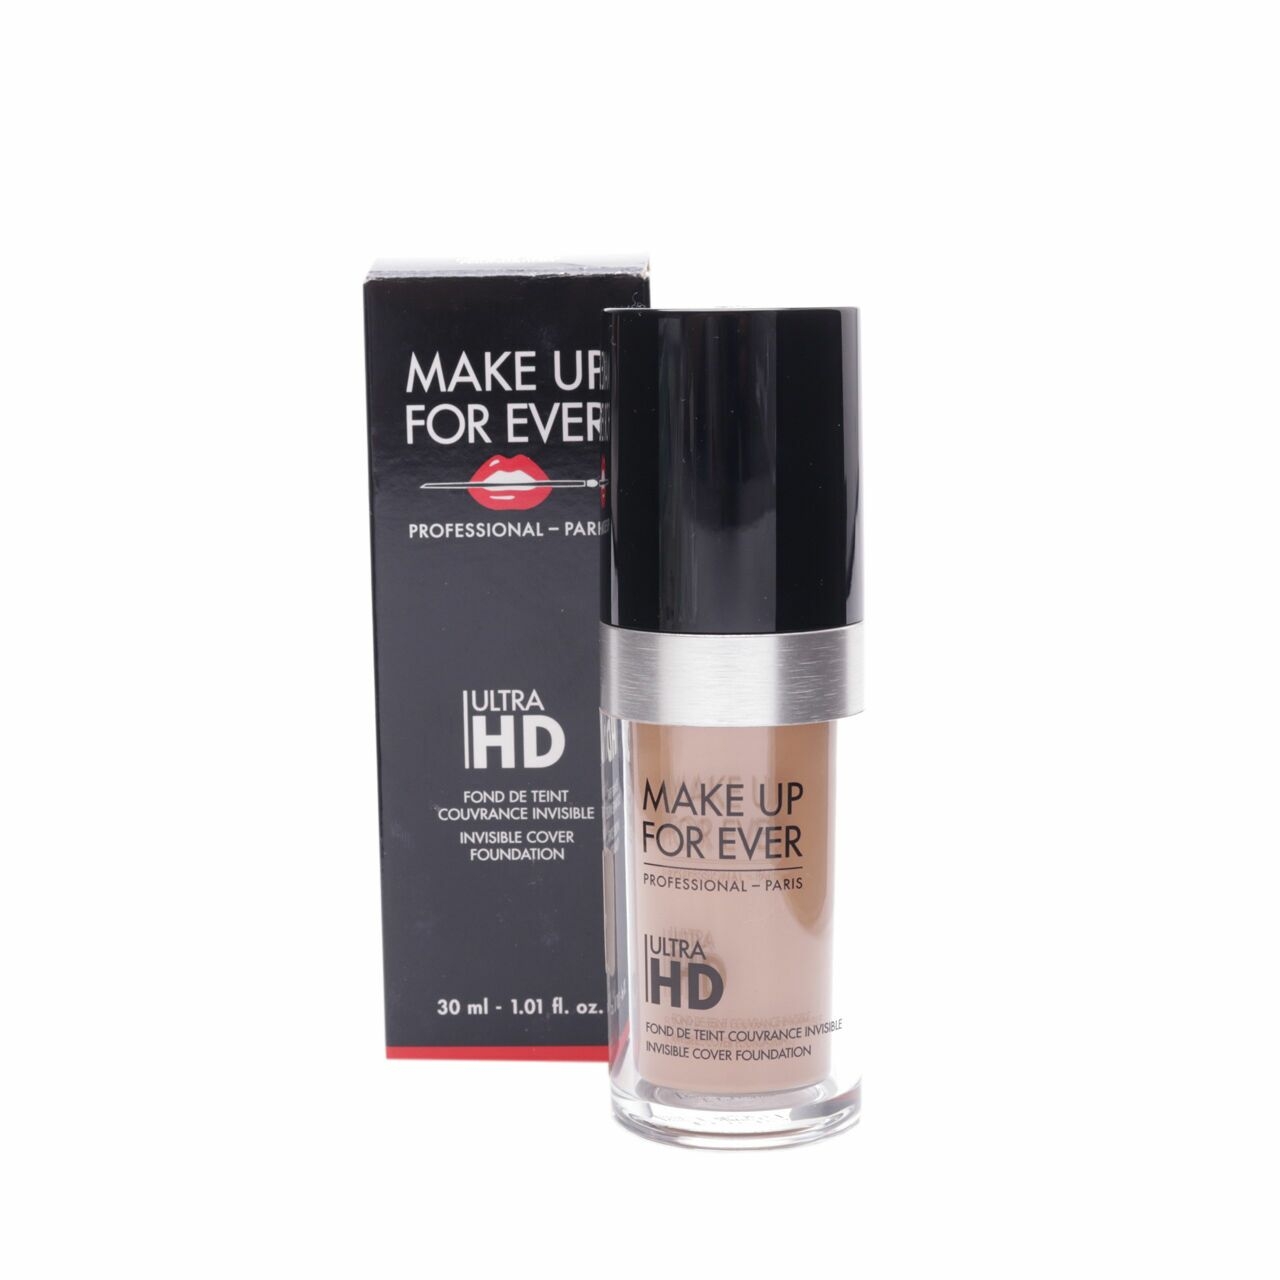 Make Up For Ever Y315 UltraHd Foundation Faces